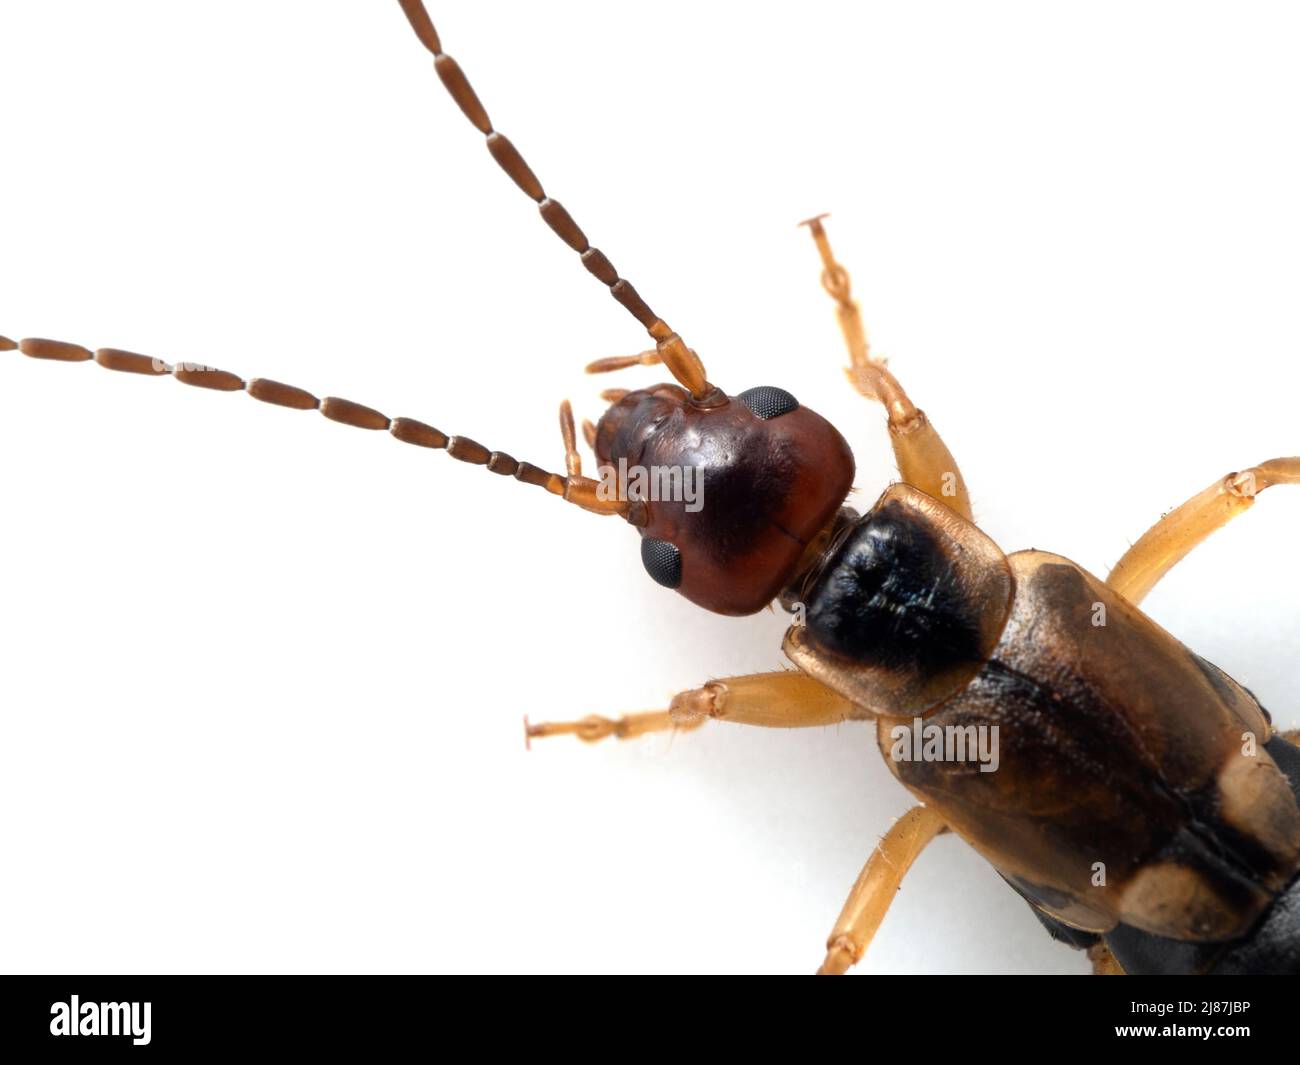 close-up of the head and antennae of a female common or European earwig, Forficula auricularia, isolated on white Stock Photo